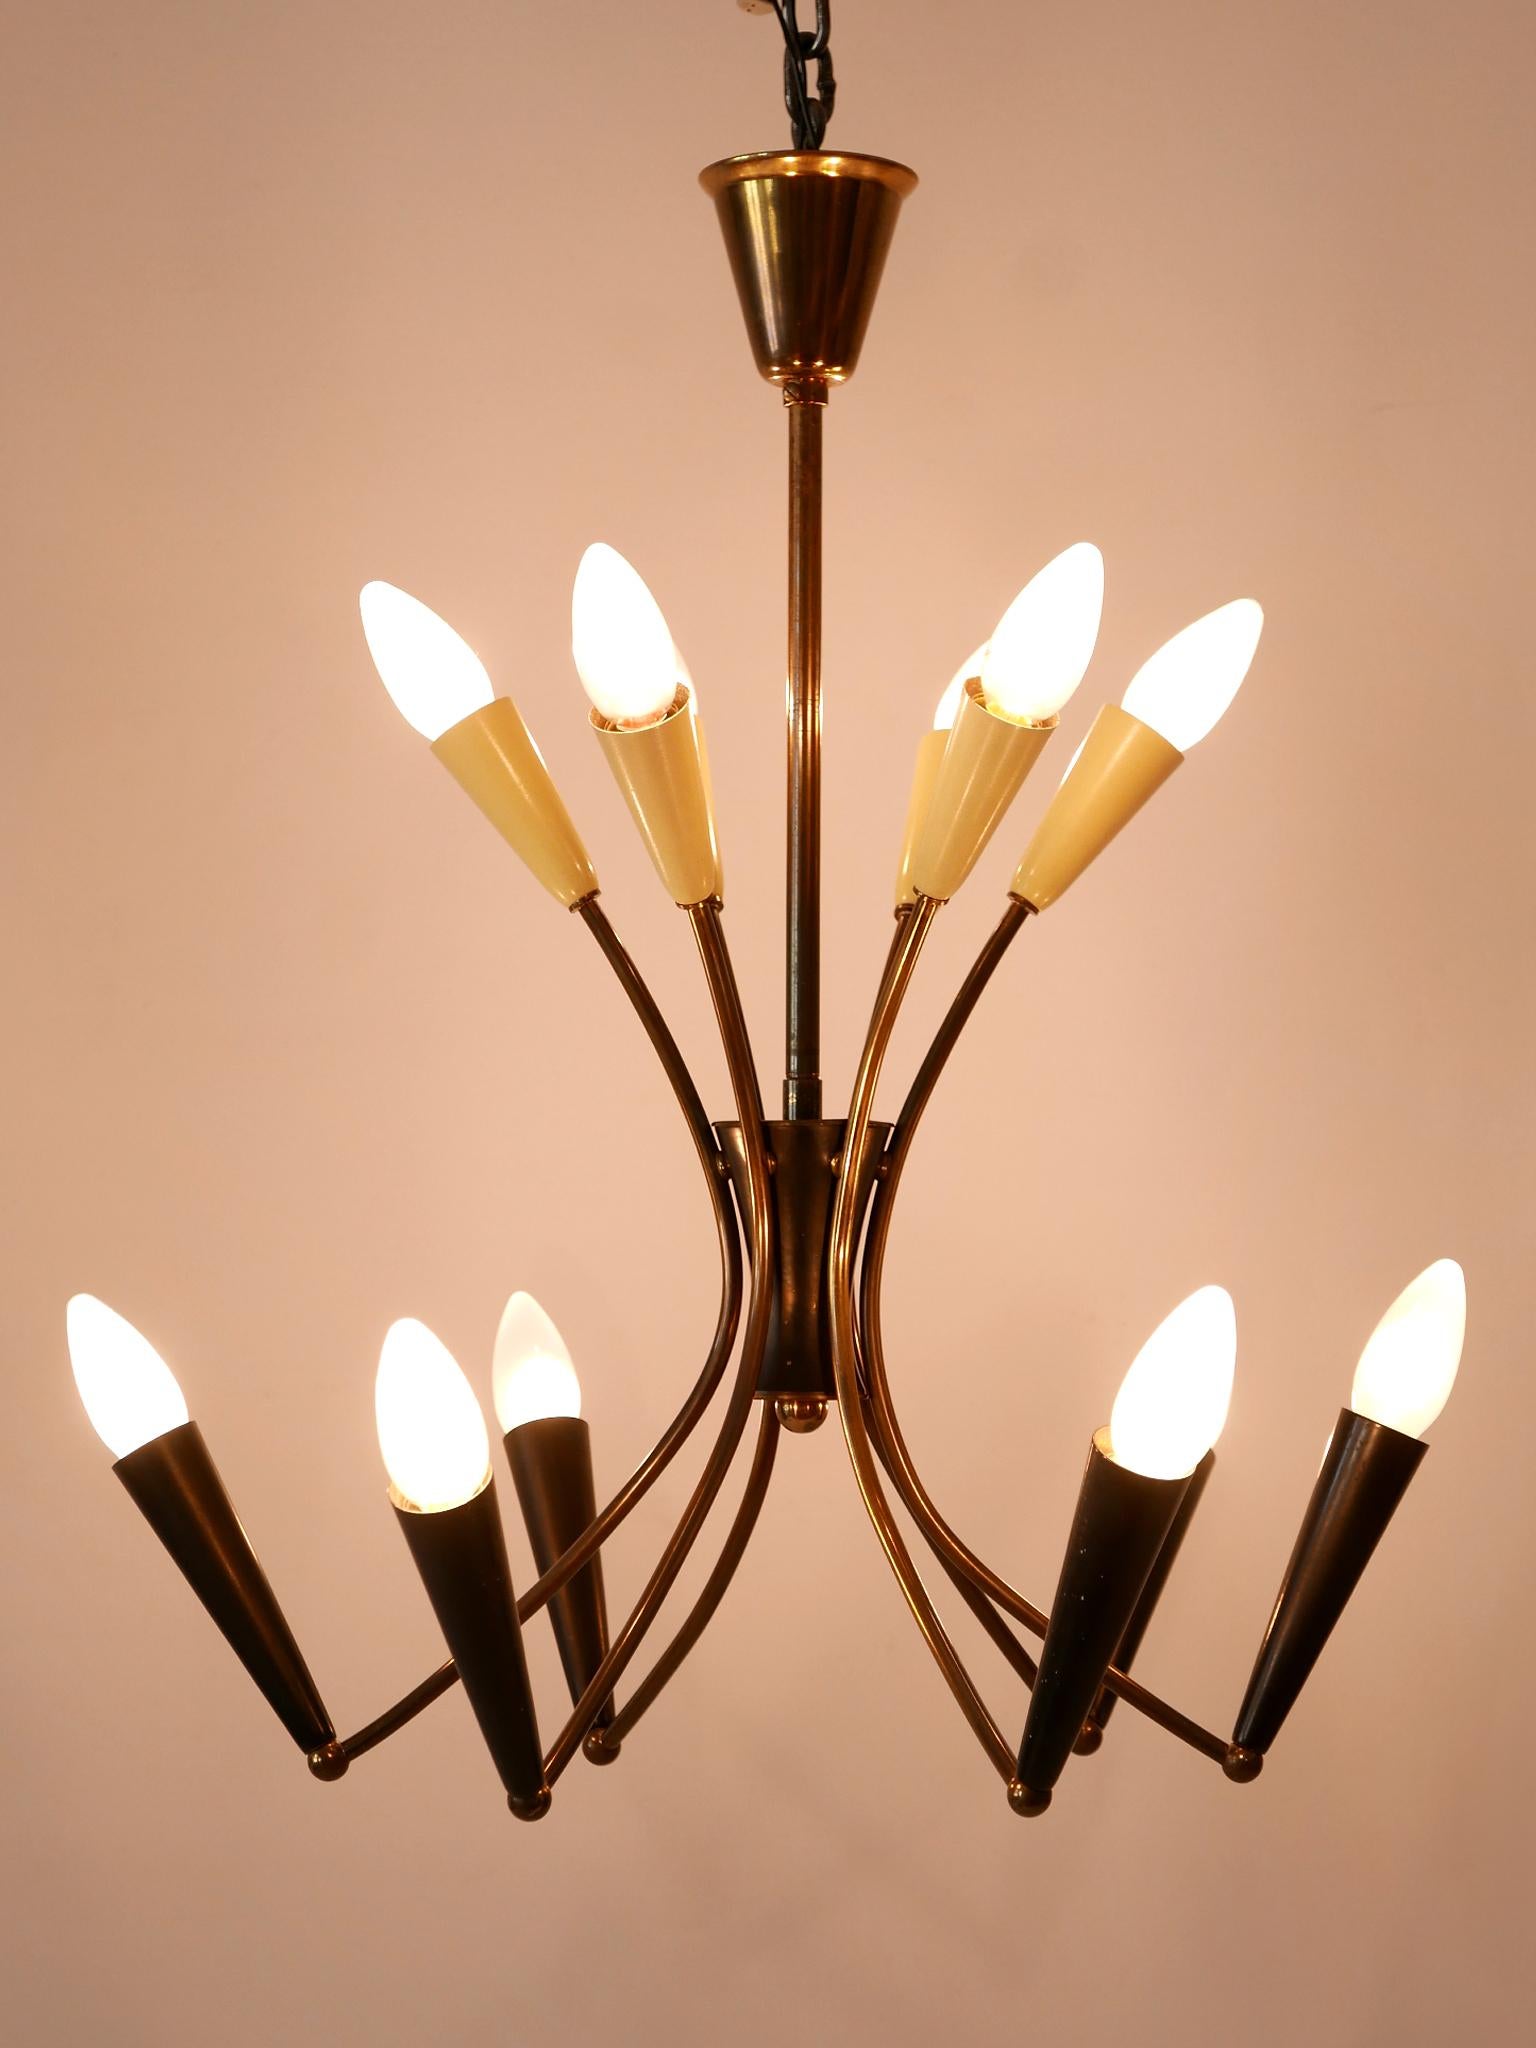 Lovely and highly decorative Mid-Century Modern 12-Flamed Sputnik pendant lamp or chandelier. Designed & manufactured in Germany, 1950s.

Executed in brass & metal, the pendant lamp / chandelier is executed with 12 x E14 / E12 Edison screw fit bulb